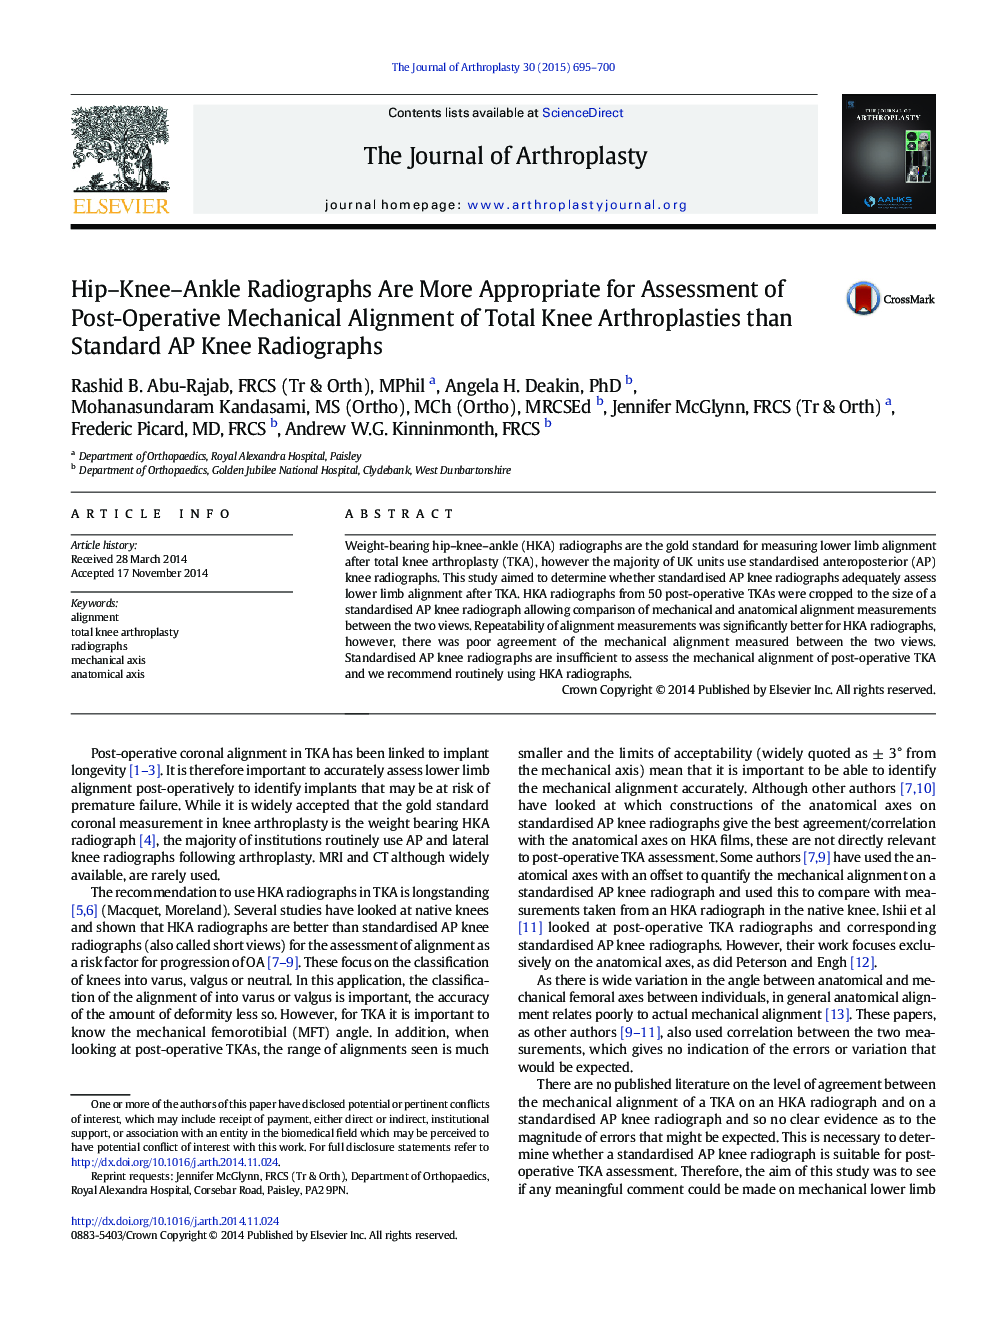 Hip–Knee–Ankle Radiographs Are More Appropriate for Assessment of Post-Operative Mechanical Alignment of Total Knee Arthroplasties than Standard AP Knee Radiographs 